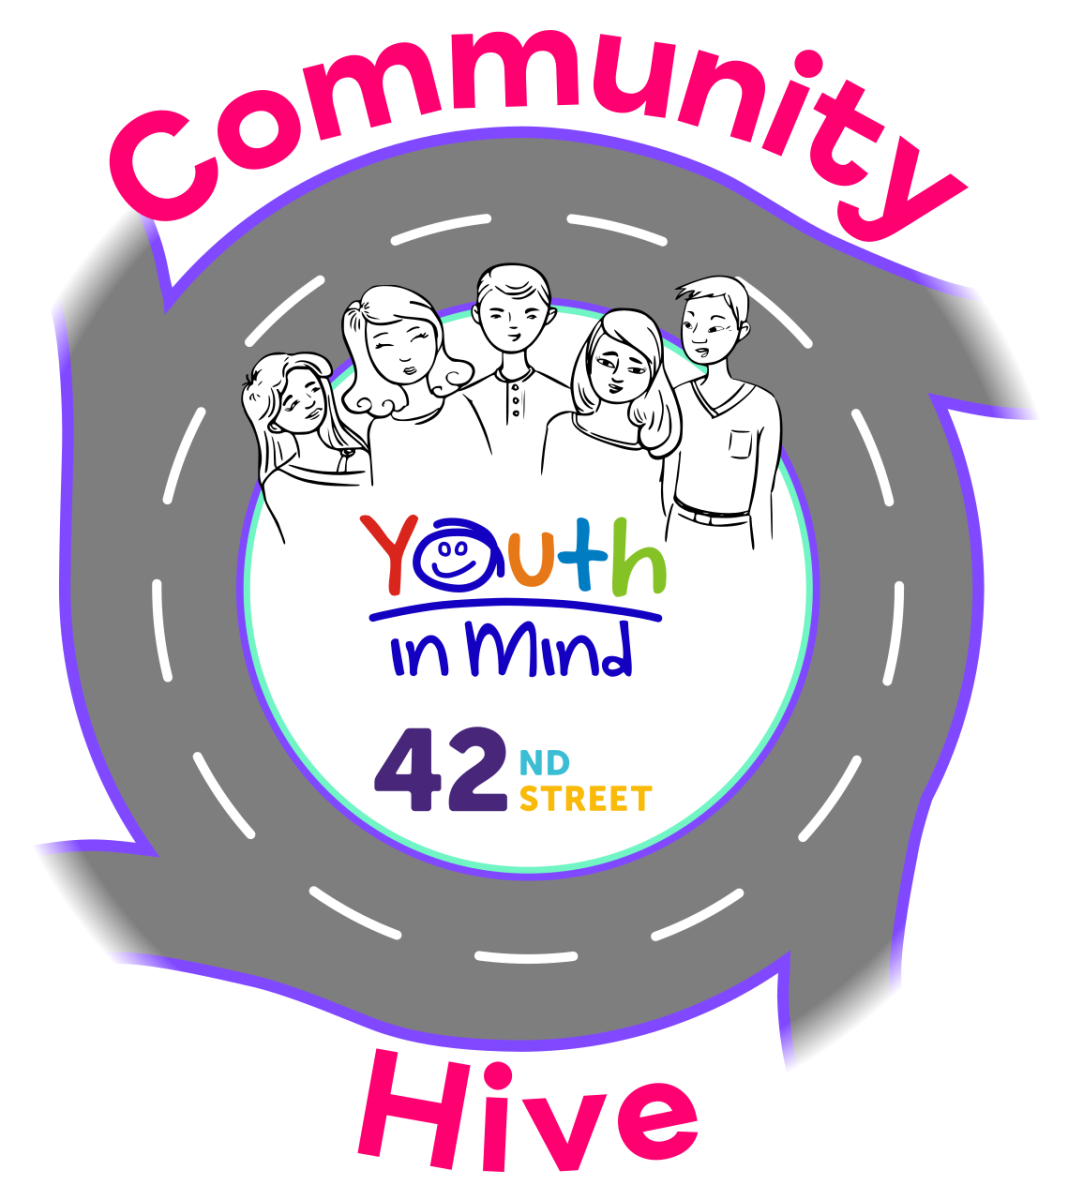 Our logo for the Community Hive service. A roundabout graphic is depicted with a group of illustrated young people in the center.